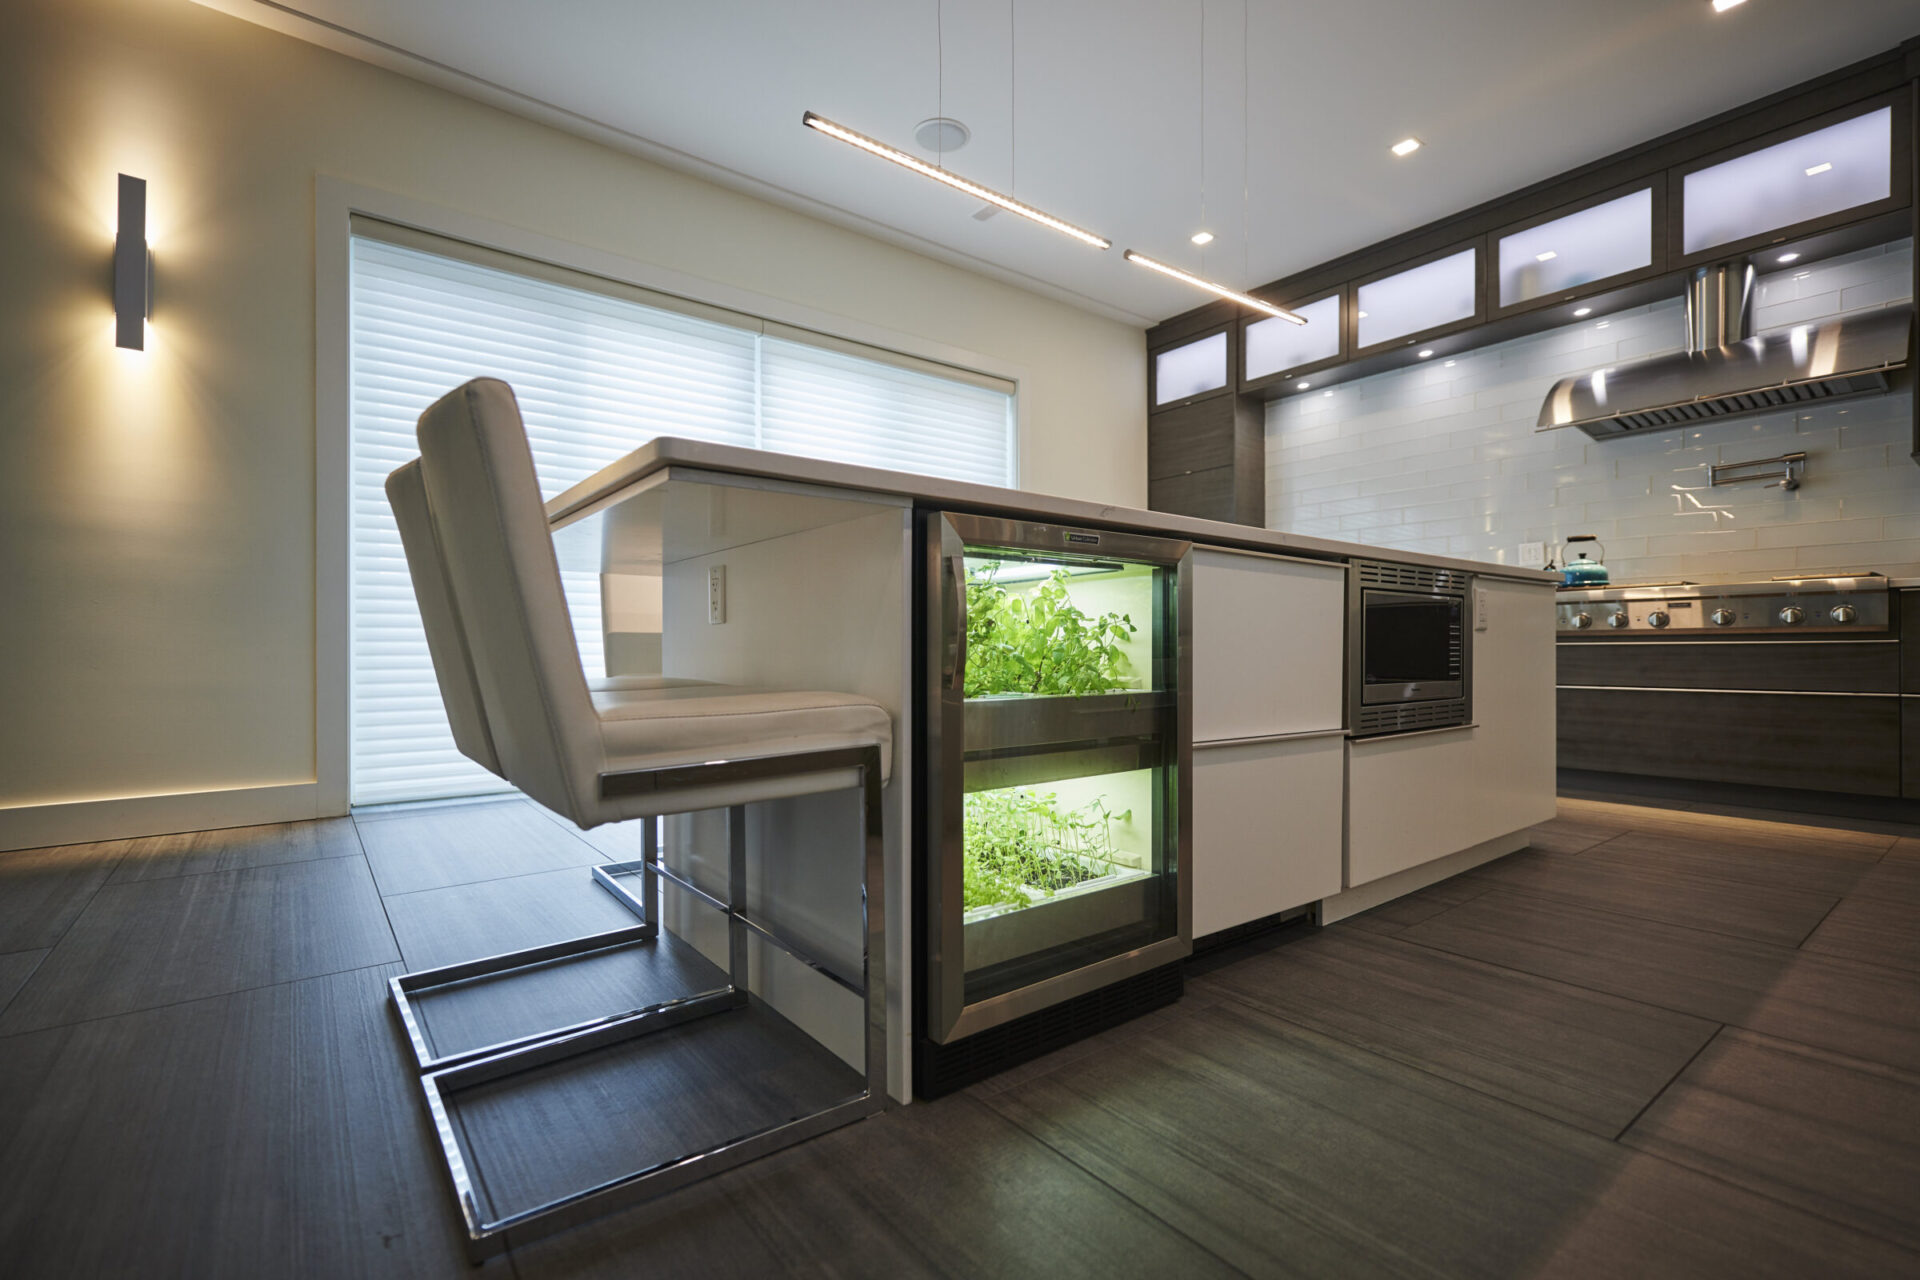 A modern kitchen with LED lighting, sleek cabinetry, and an indoor herb garden cabinet next to a high chair at a breakfast bar.